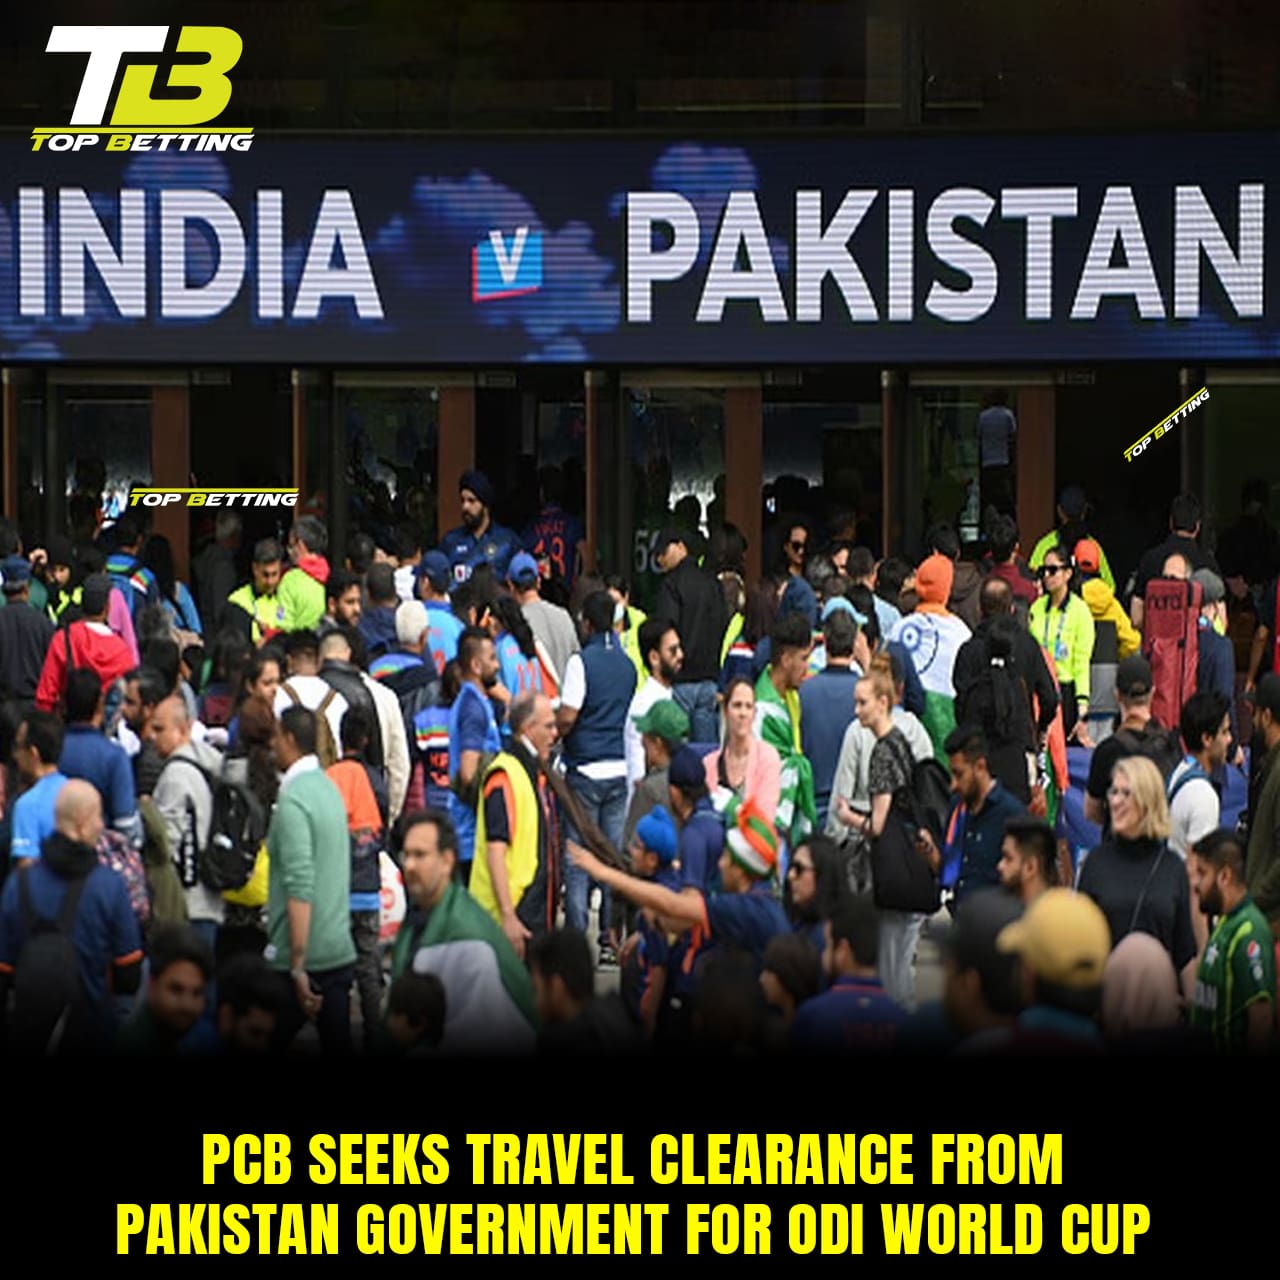 PCB Seeks Travel Clearance from Pakistan Government for ODI World Cup :